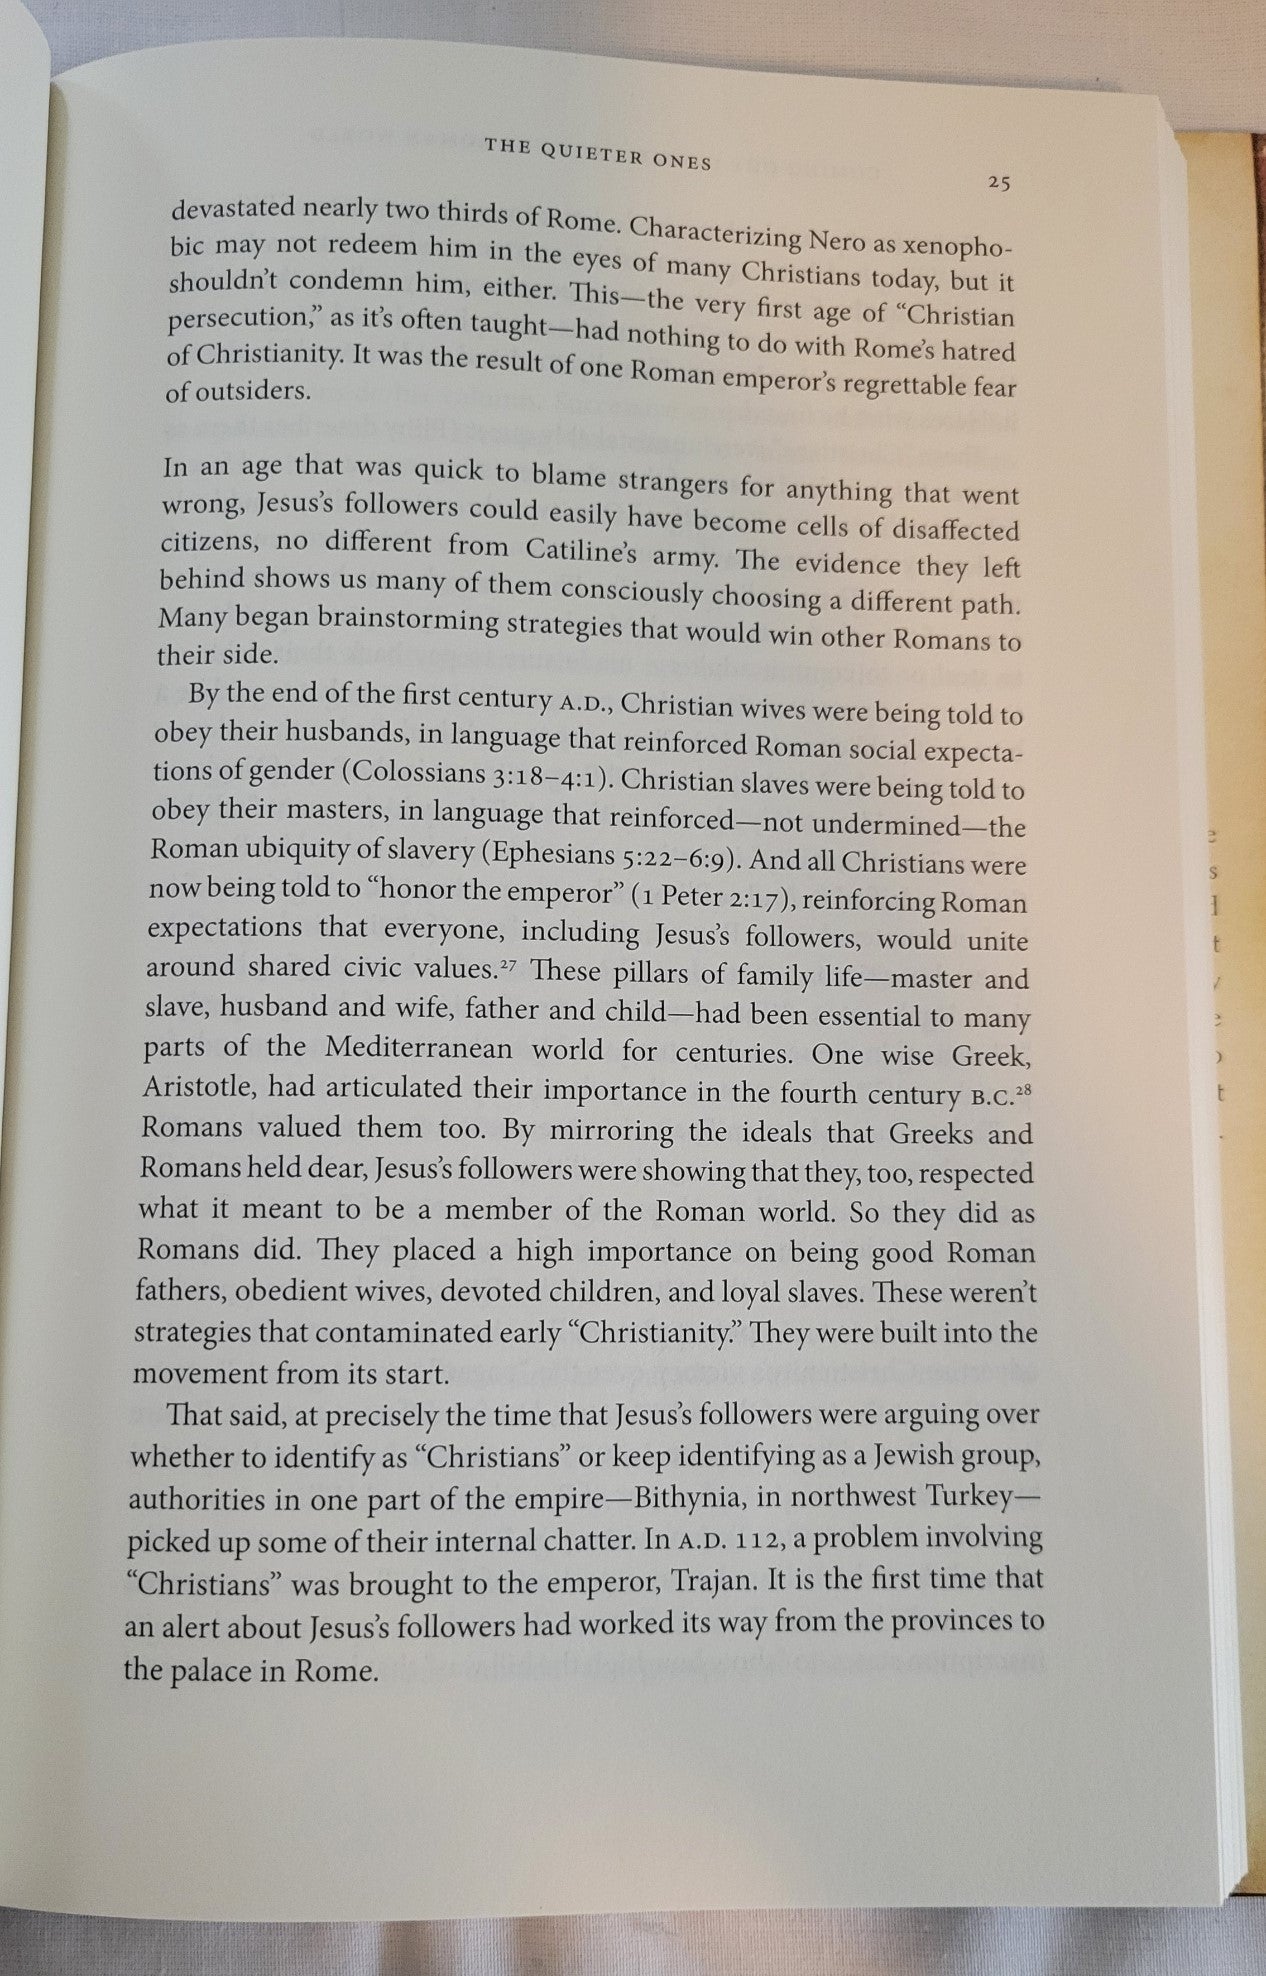 Used book Coming Out Christian in the Roman World written by Douglas Boin.  View of page 25